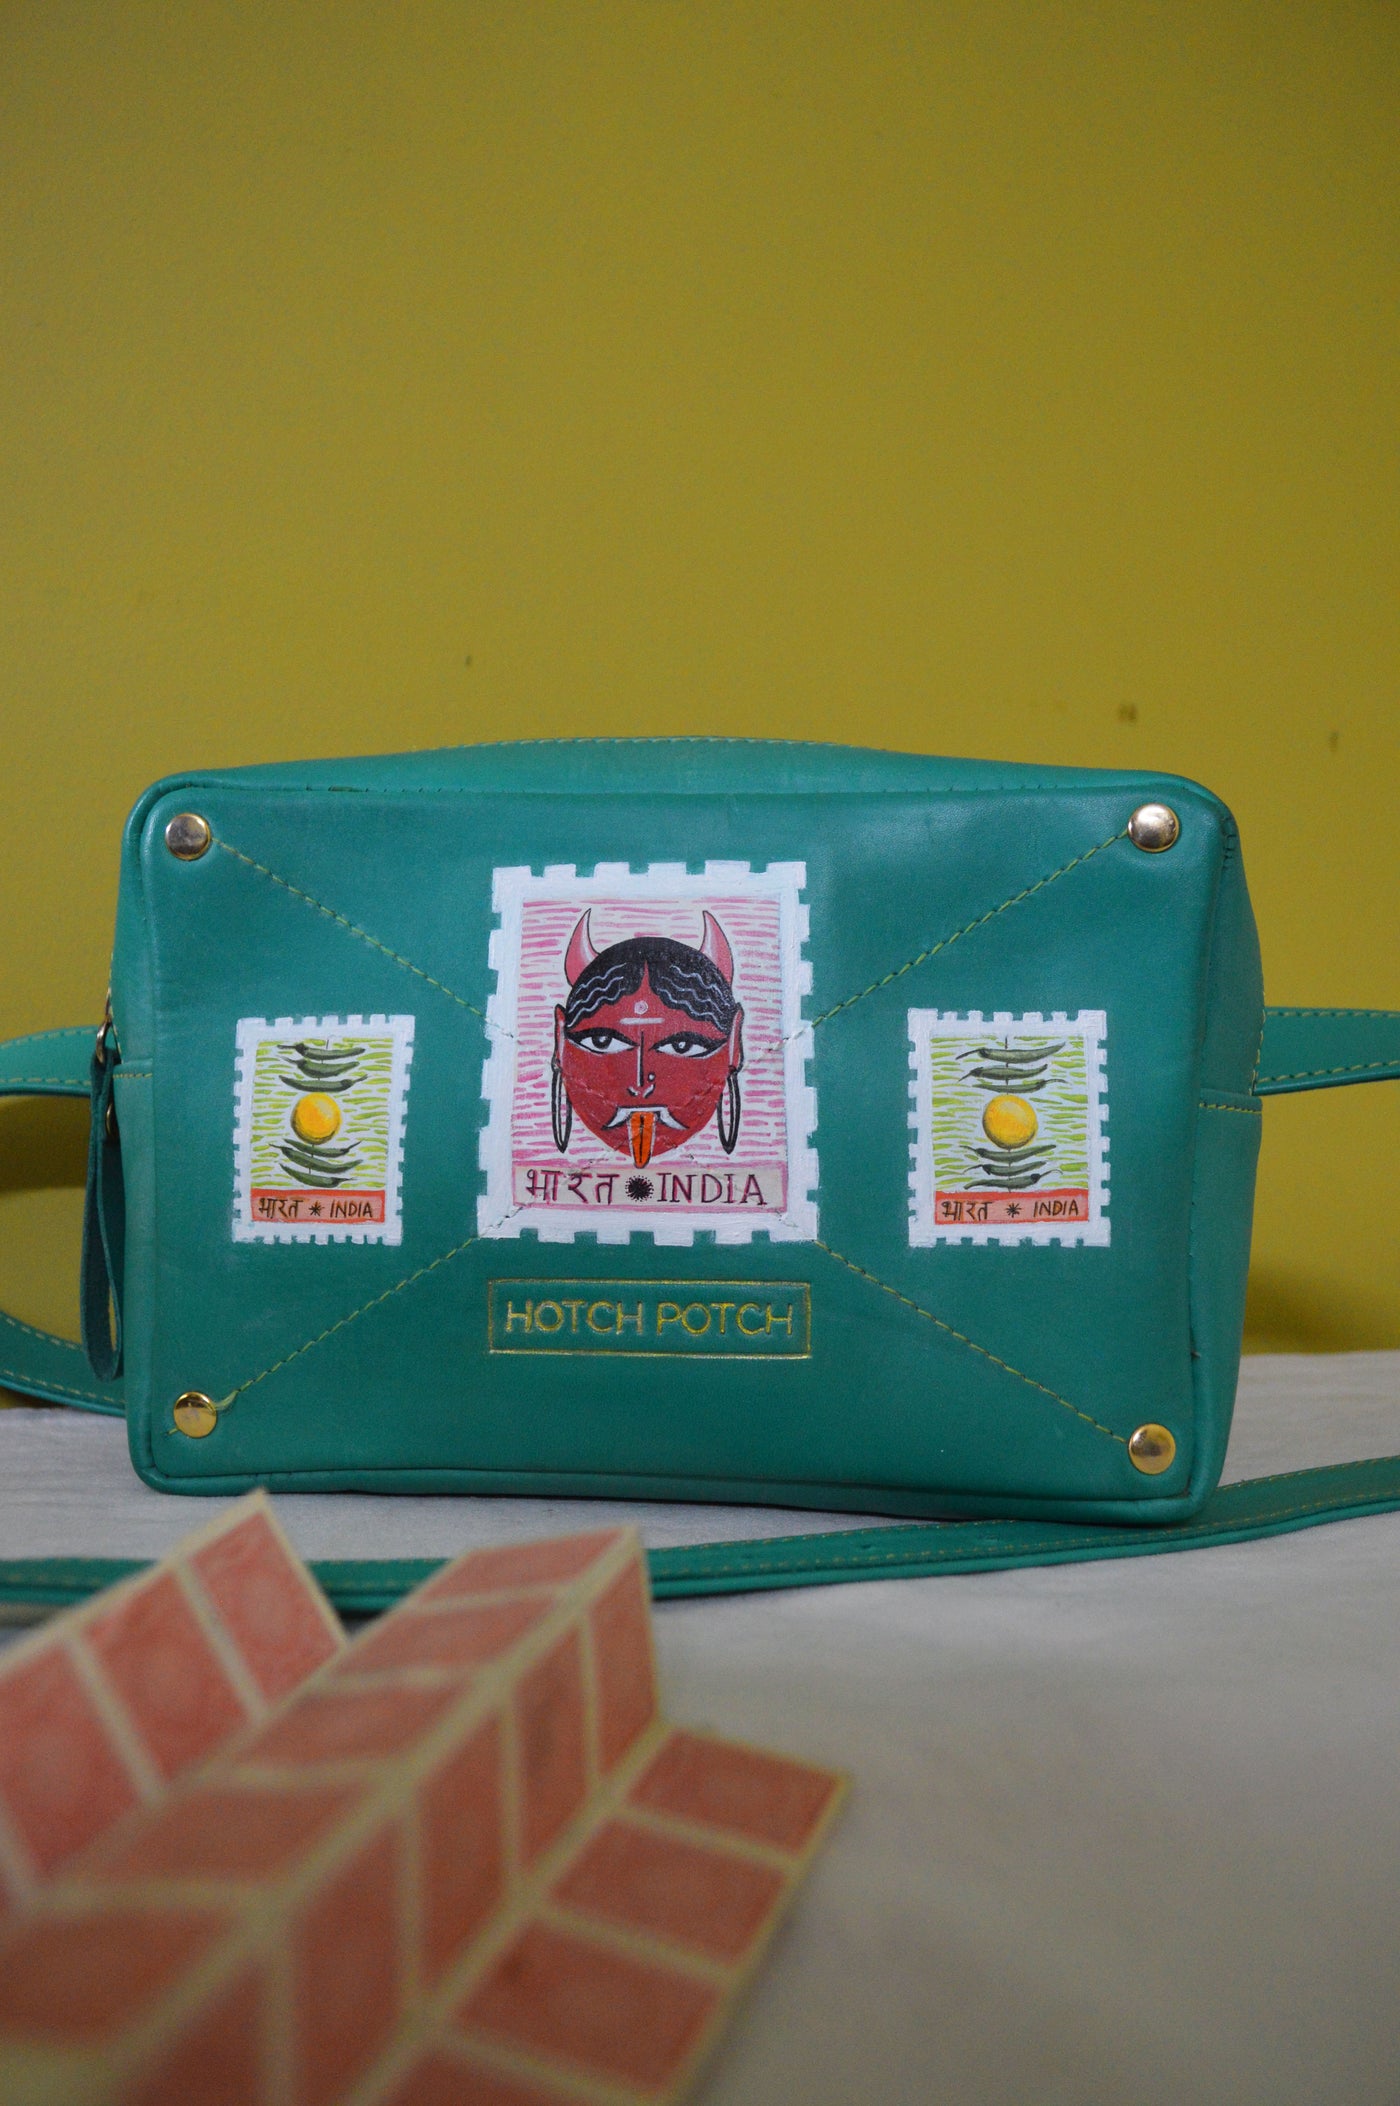 Green coloured bag with Bharat and India text and traditional woman's face